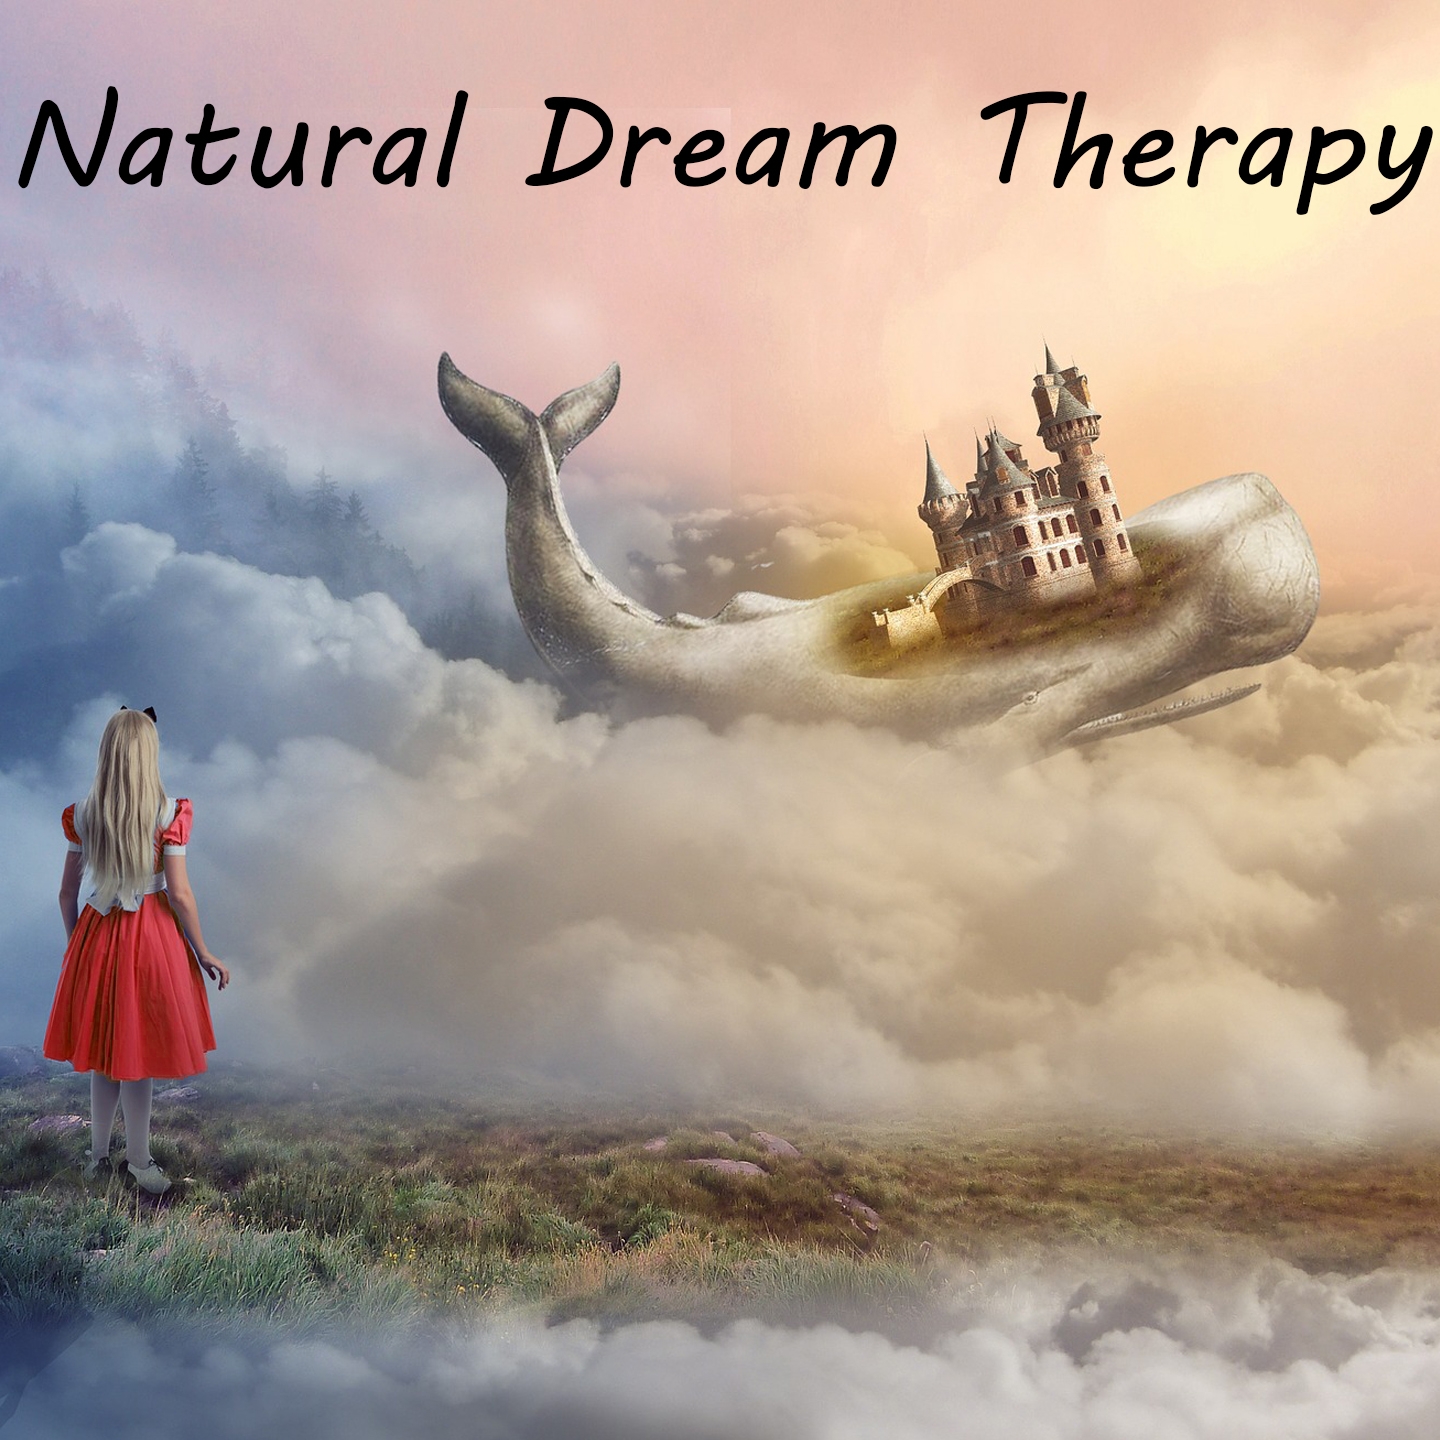 Natural Dream Therapy